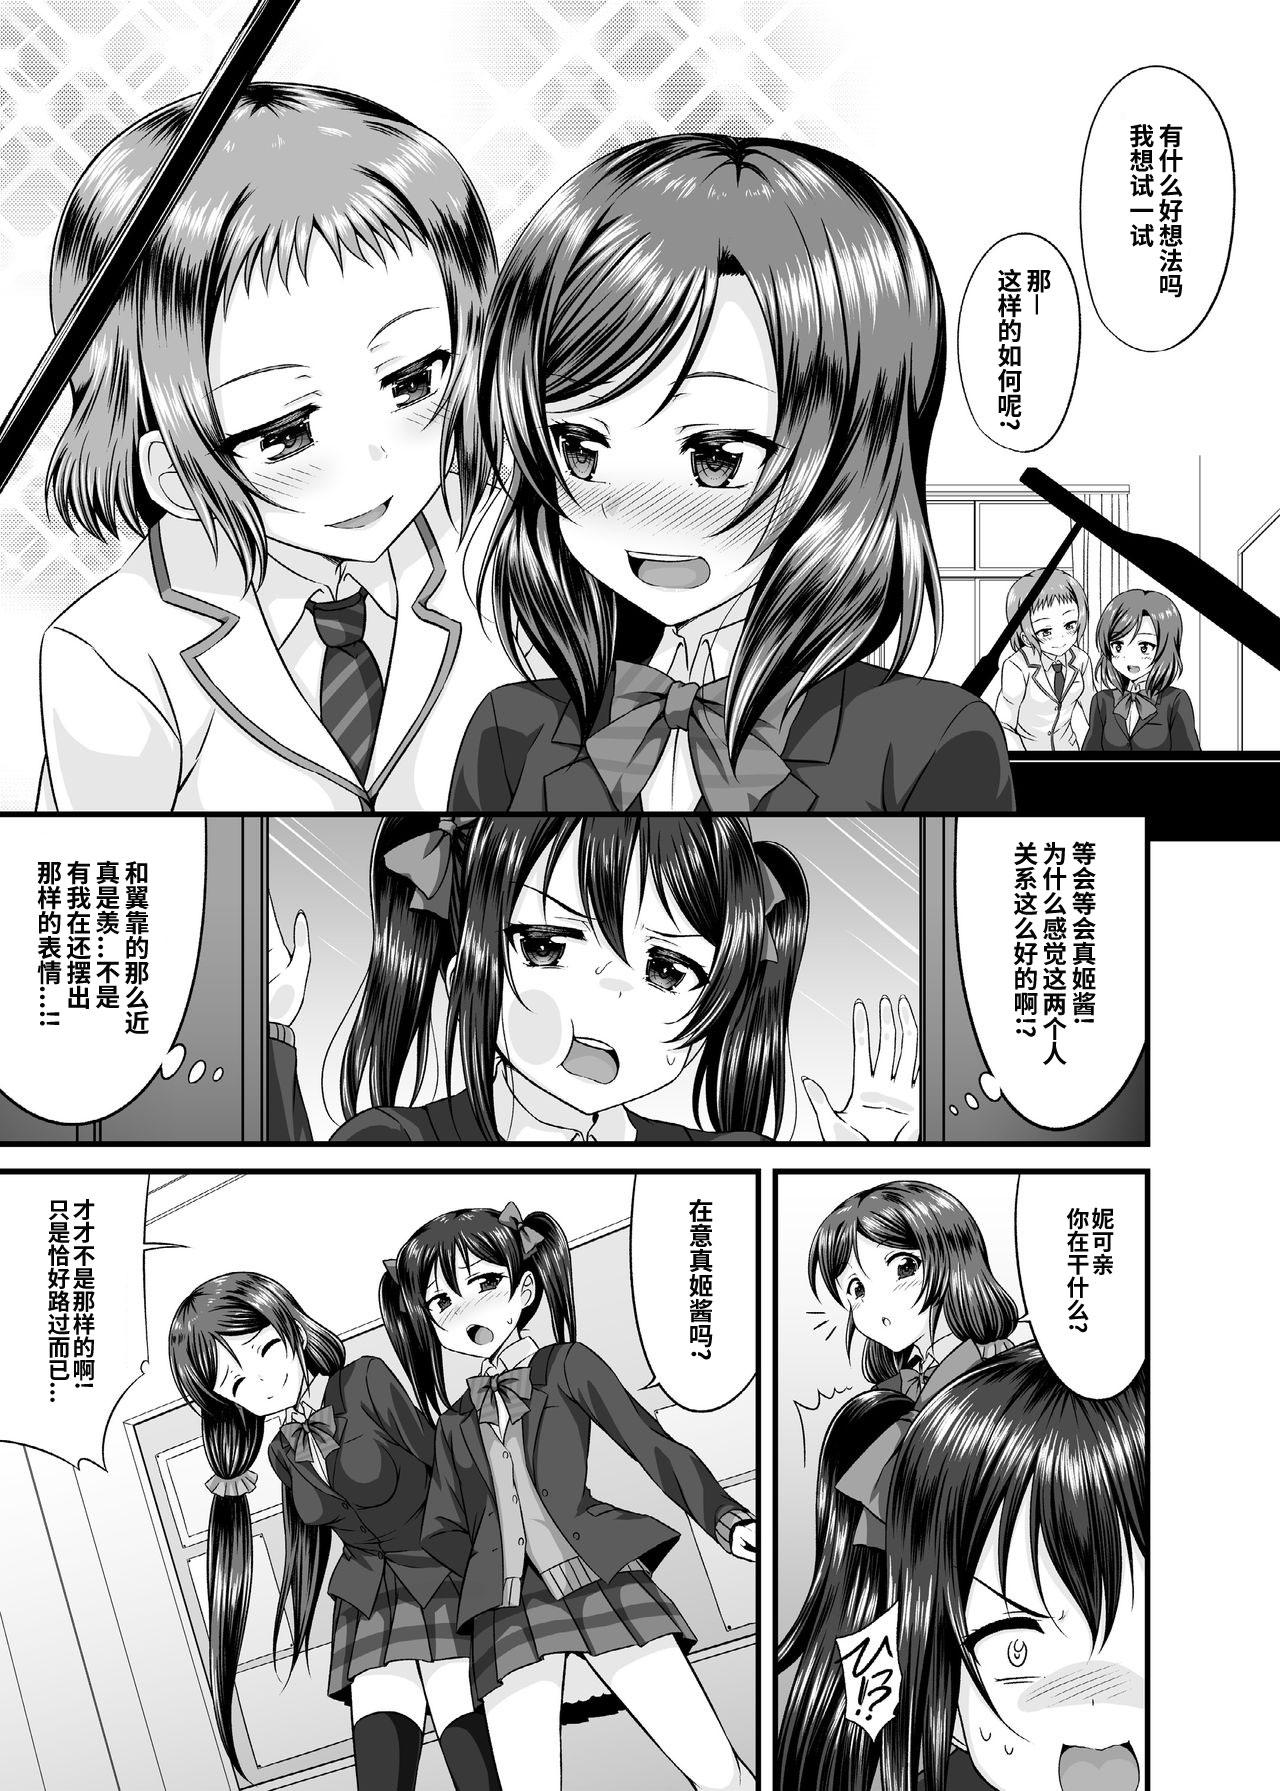 Blowjobs Magnetic Love - Love live Indo - Page 3